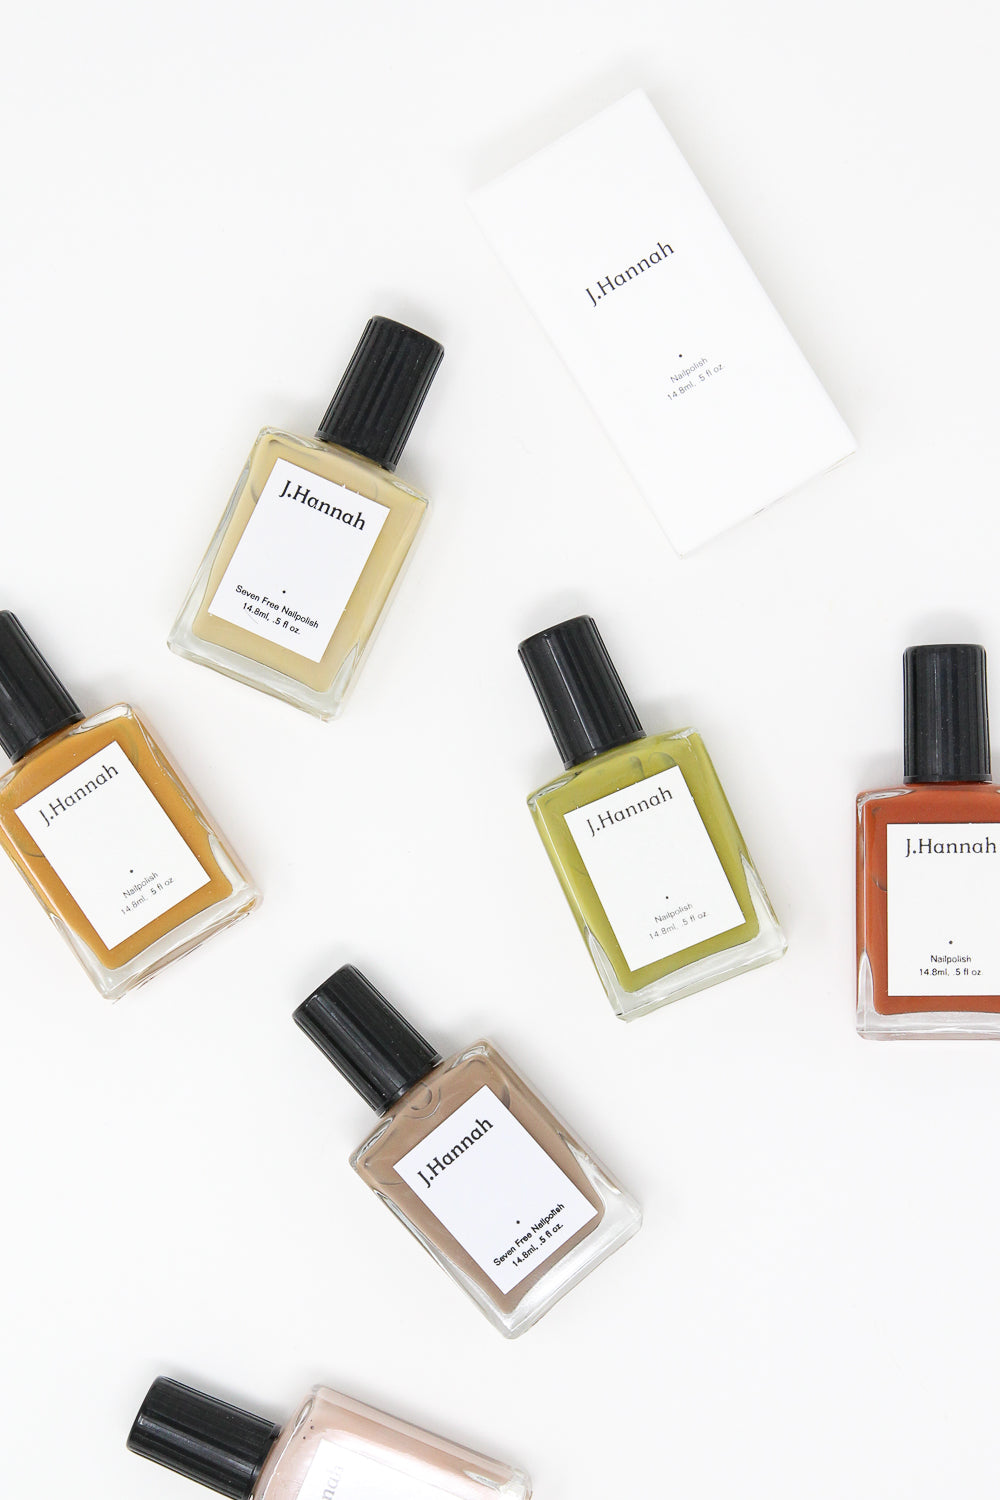 Five J Hannah Eames nail polishes in vibrant colors on a white surface.